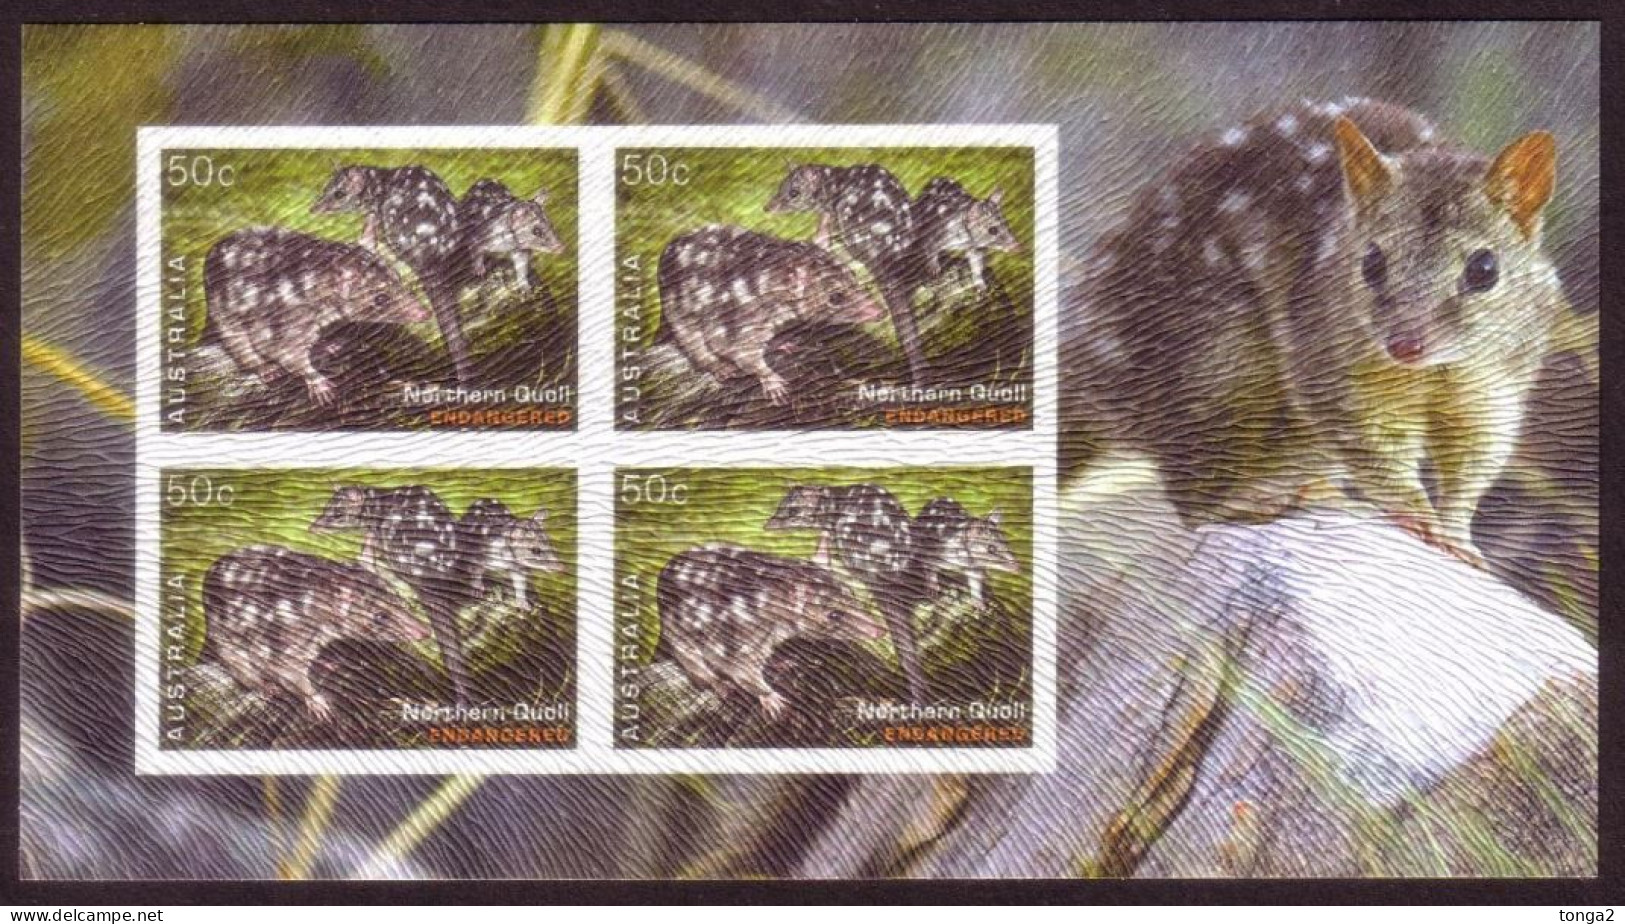 Australia IMPERF S/S Printed With Flocking (200 Exist) - Northern Quolll - Unusual - Read Description - Mint Stamps